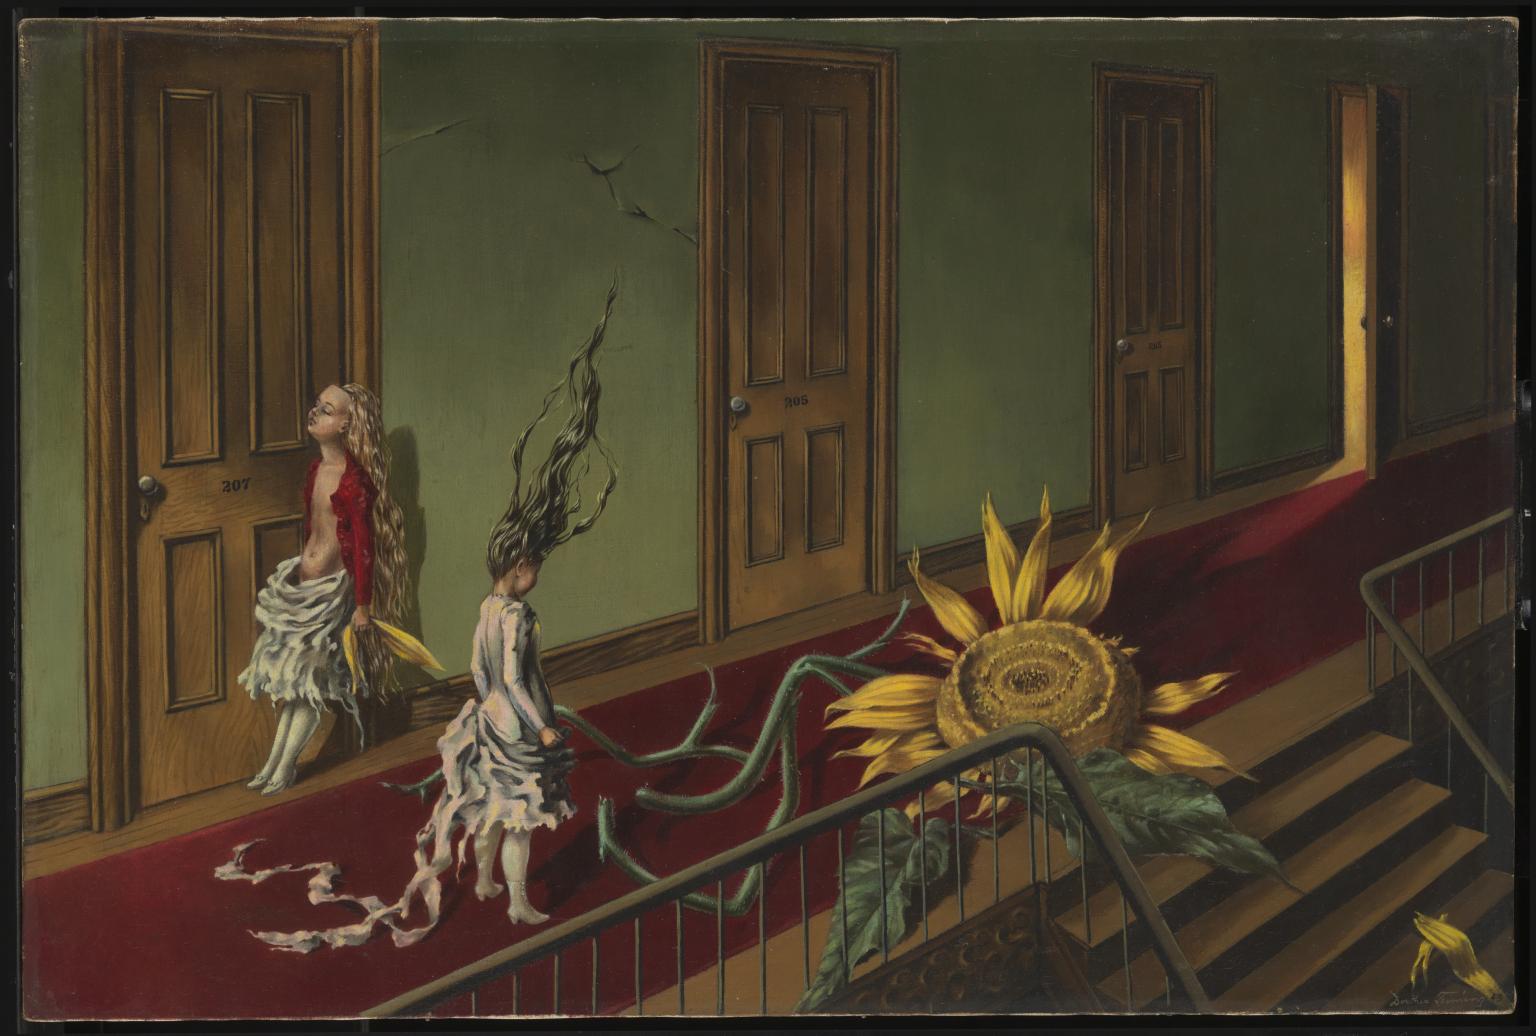 Eine Kleine Nachtmusik 1943 by Dorothea Tanning 1910-2012, Purchased with assistance from the Art Fund and the American Fund for the Tate Gallery 1997